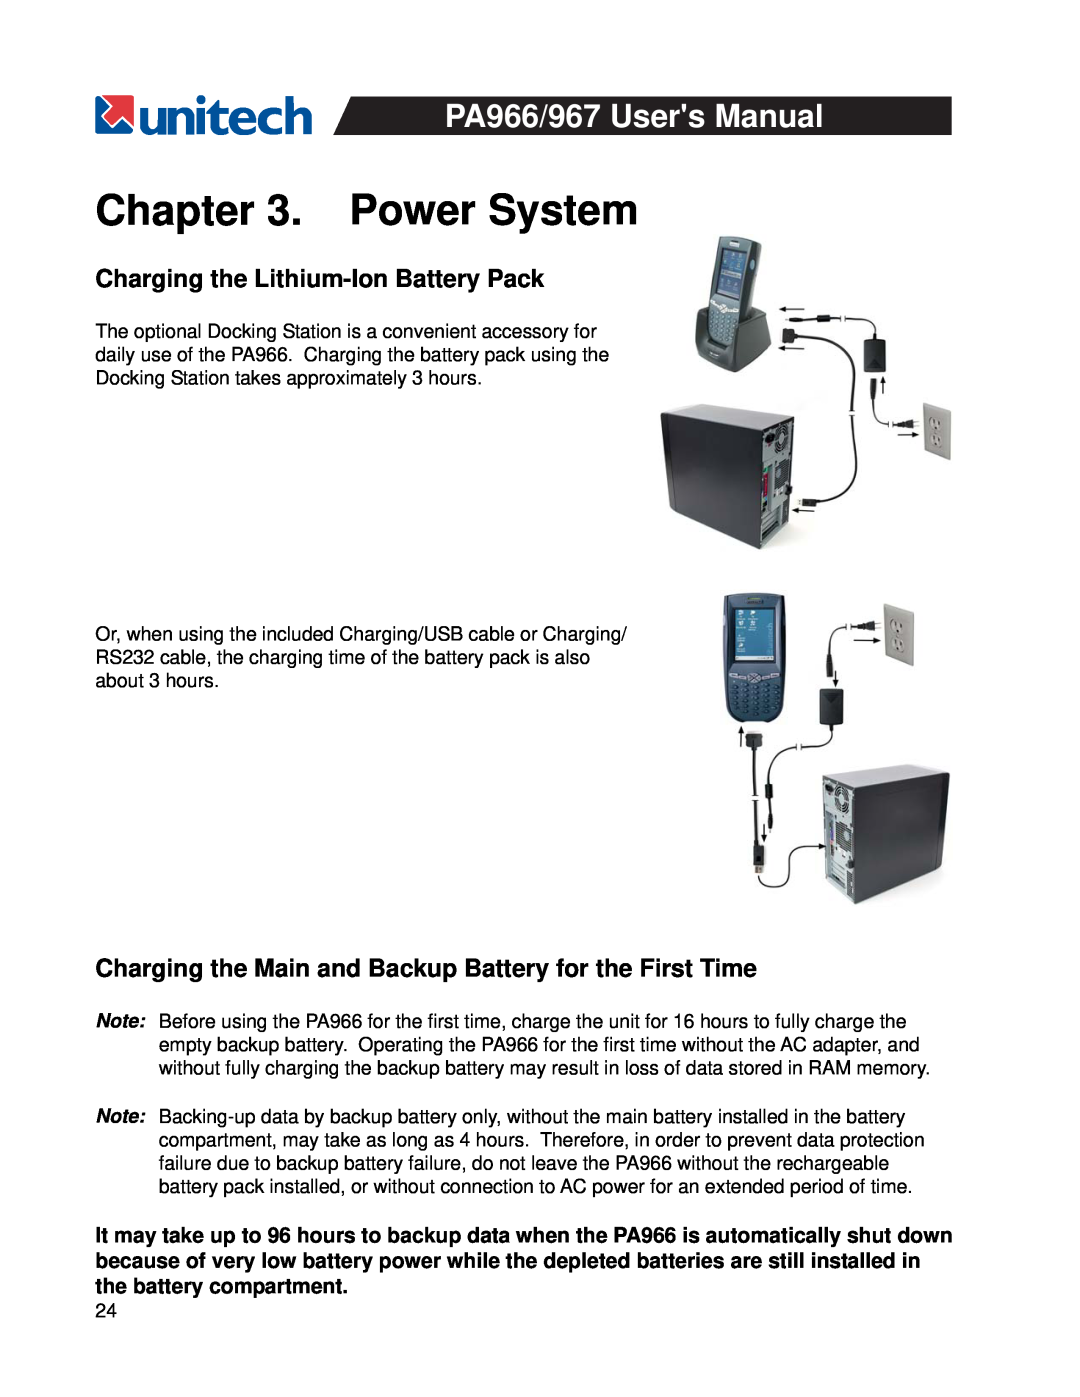 Unitech PA967, PA966 user manual Power System, Charging the Lithium-IonBattery Pack 